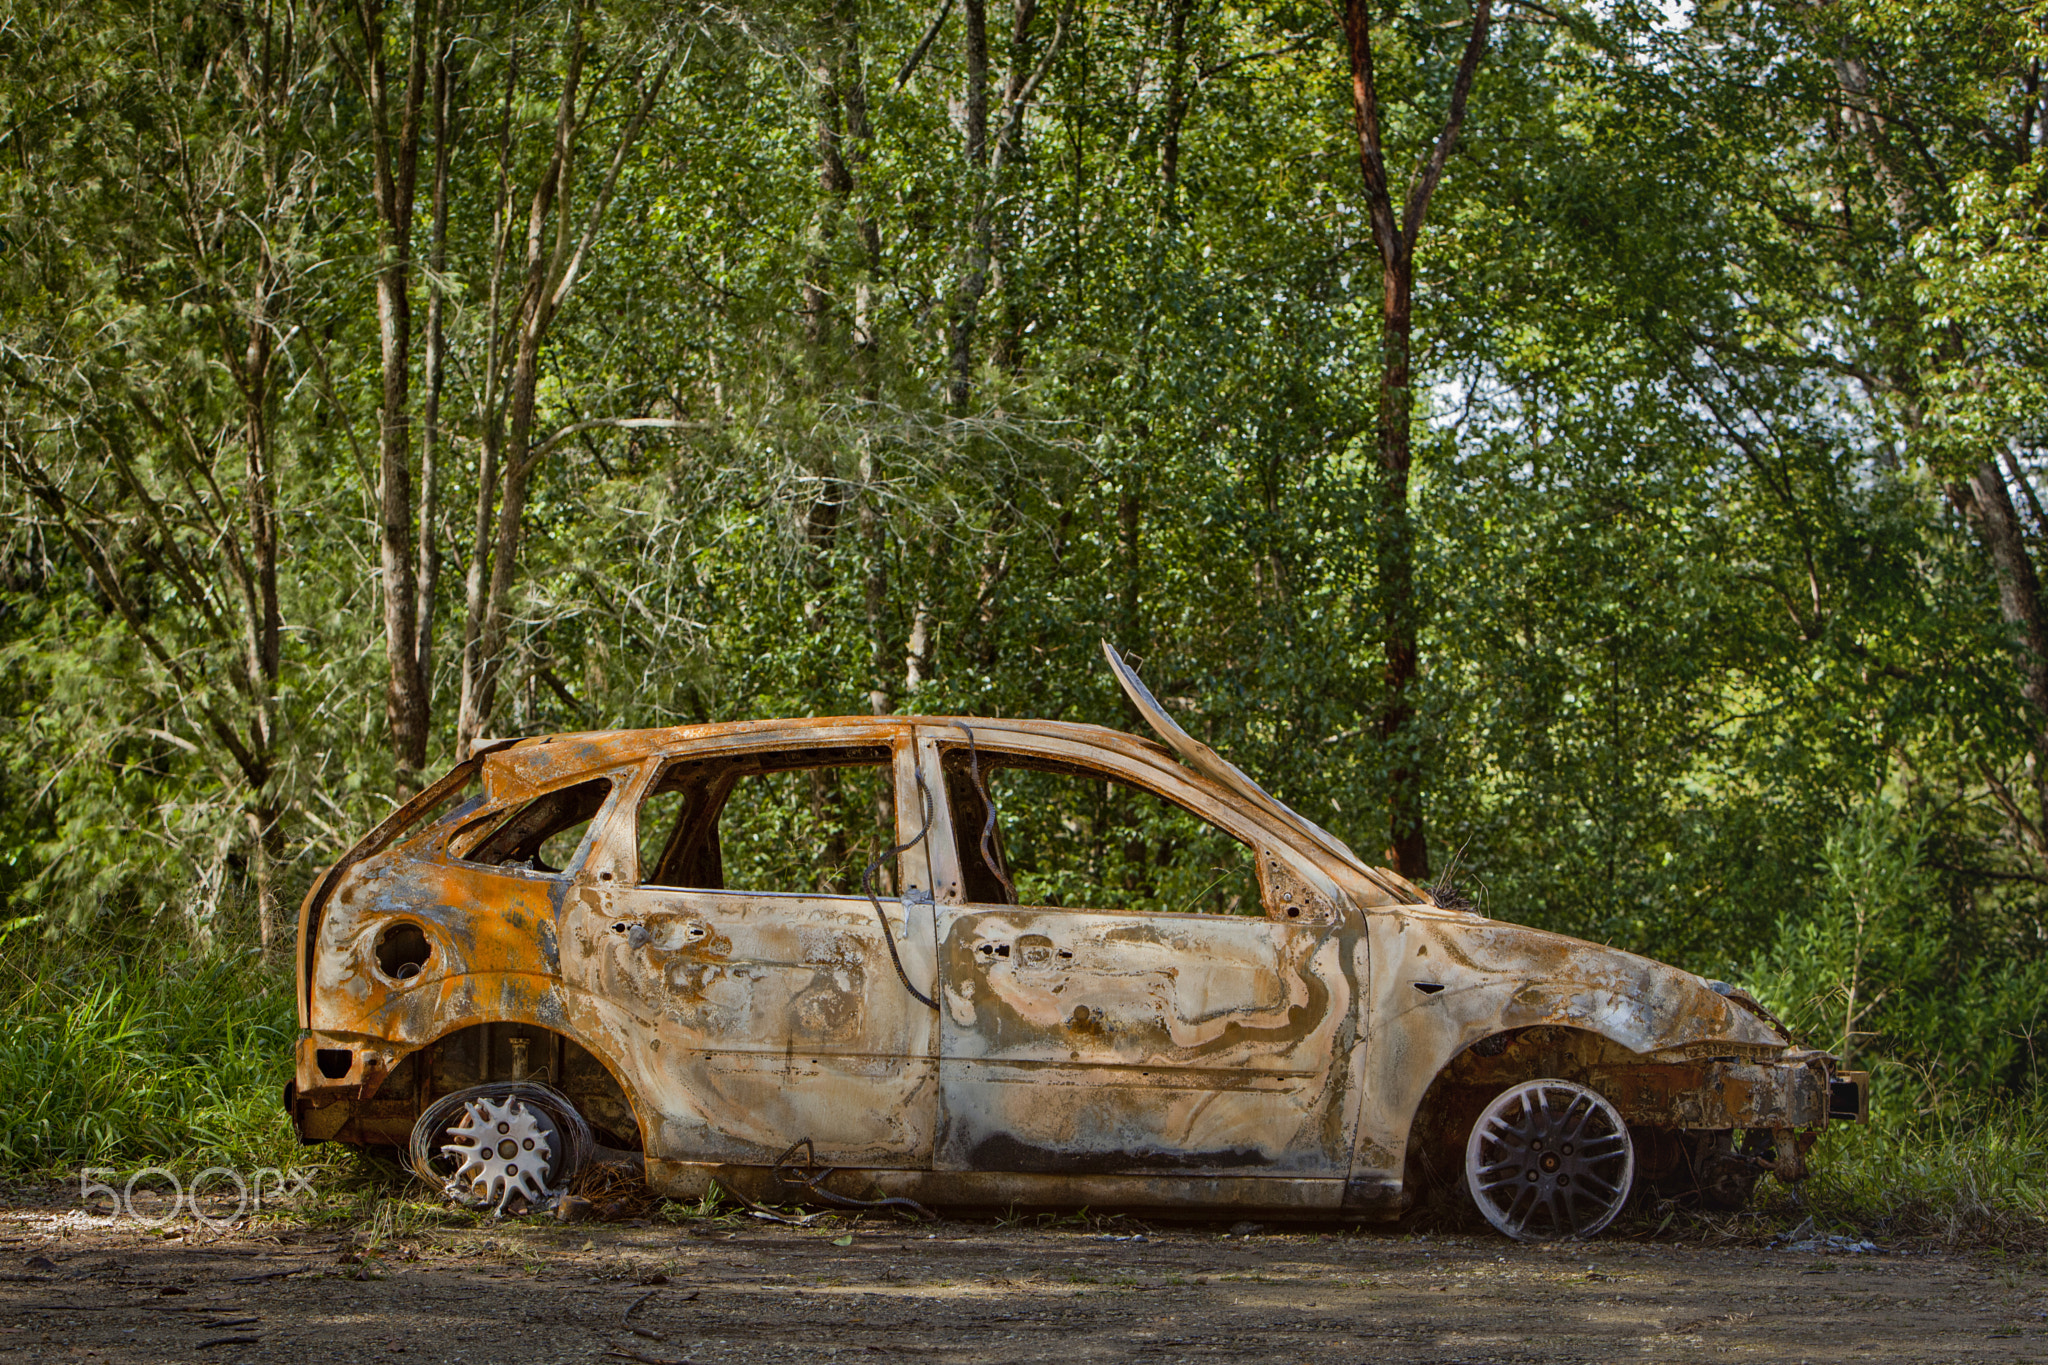 Burned and abandoned vehicle stationary in the forest, among the trees